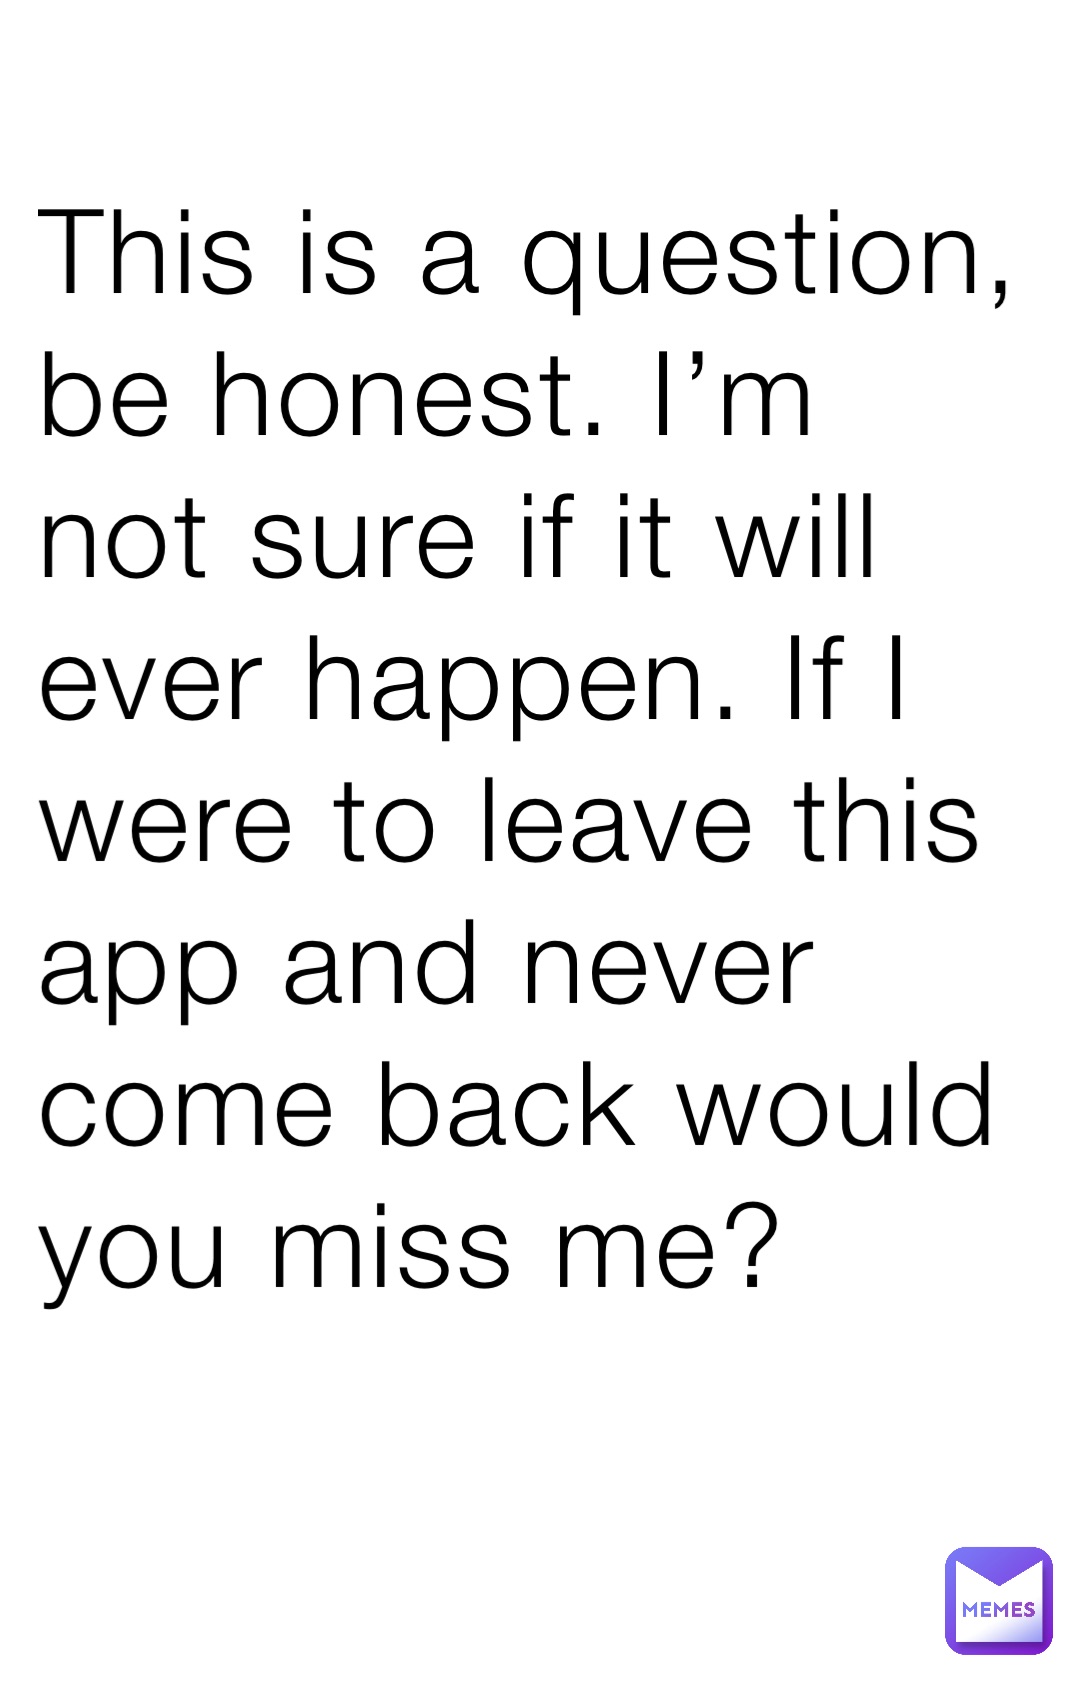 This is a question, be honest. I’m not sure if it will ever happen. If I were to leave this app and never come back would you miss me?